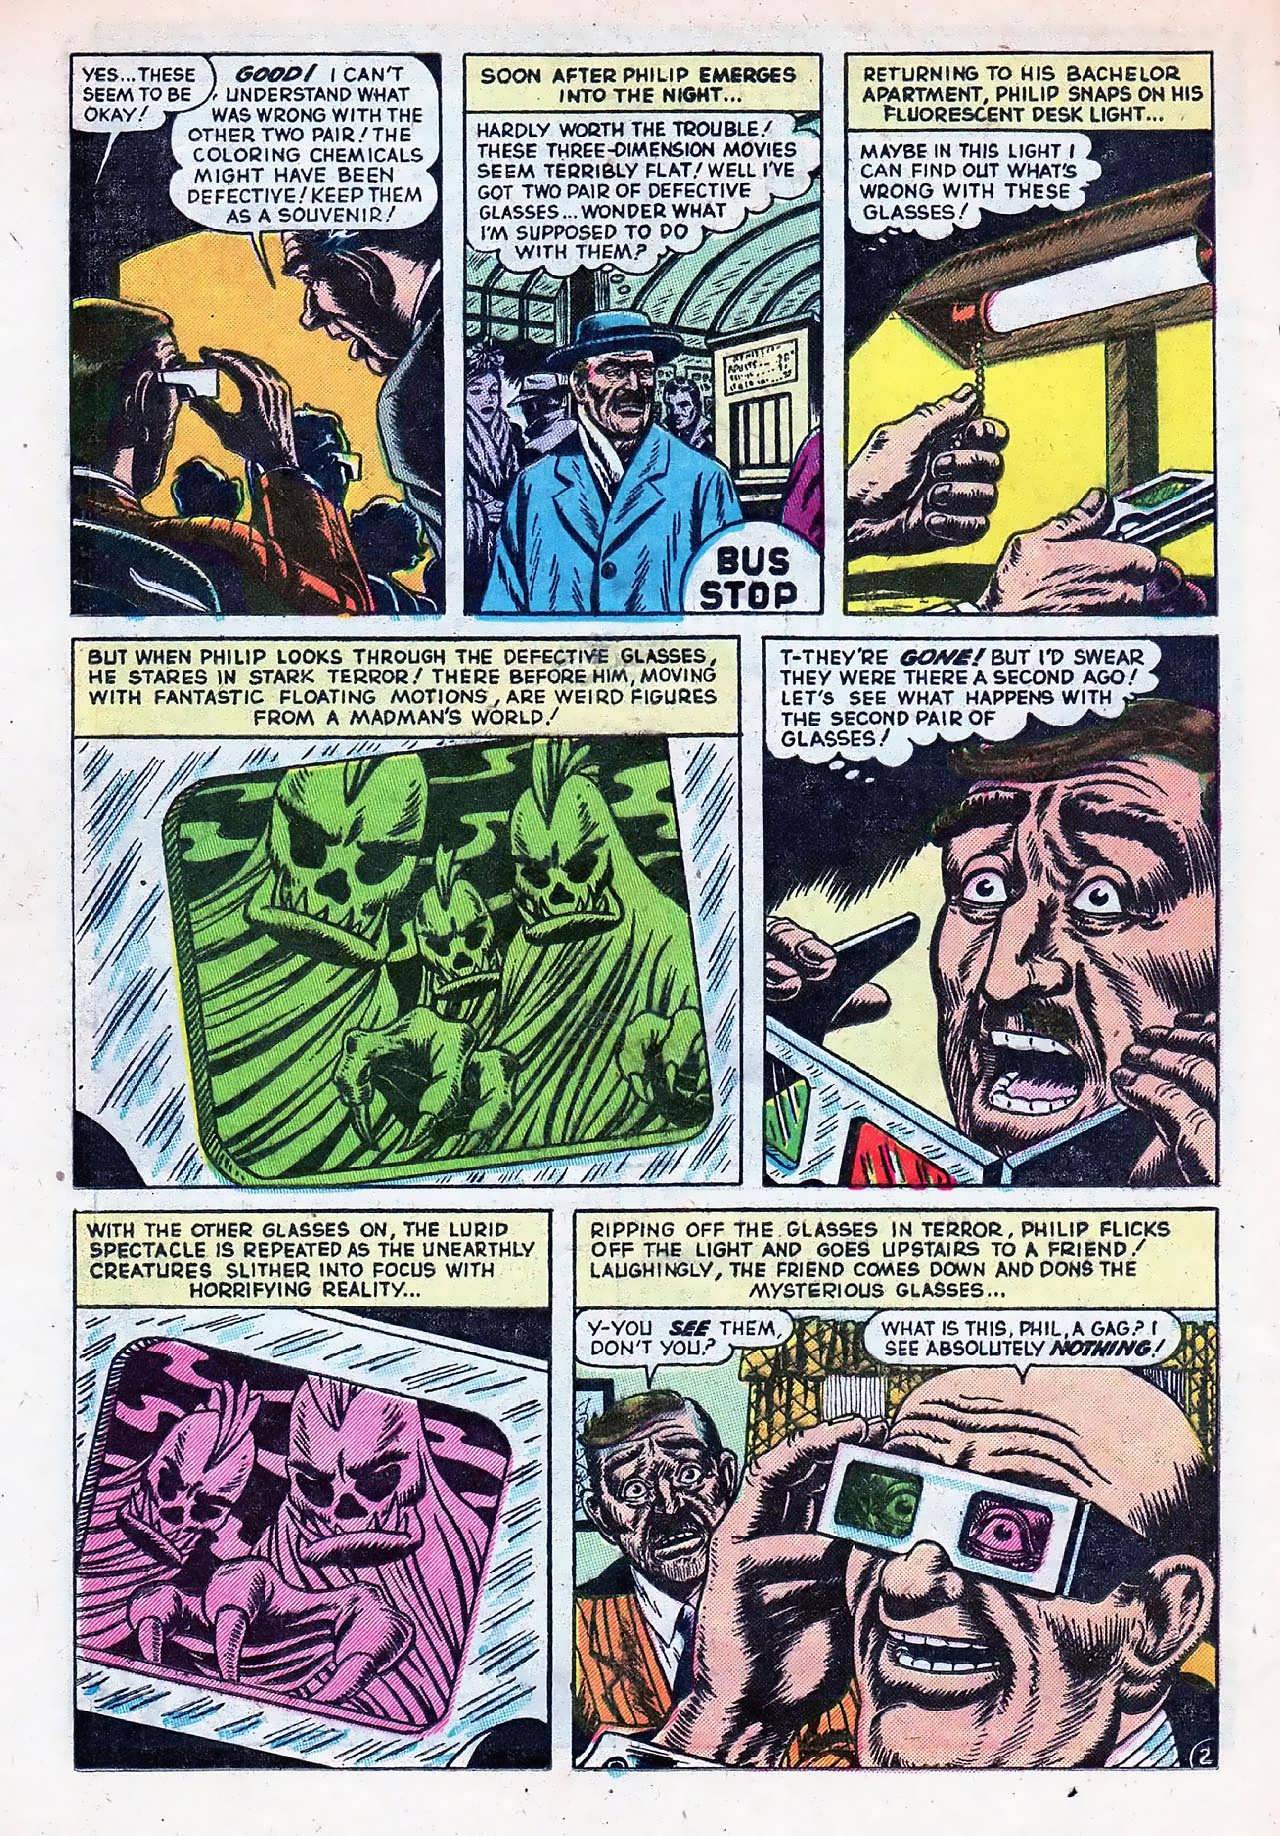 Marvel Tales (1949) 122 Page 23